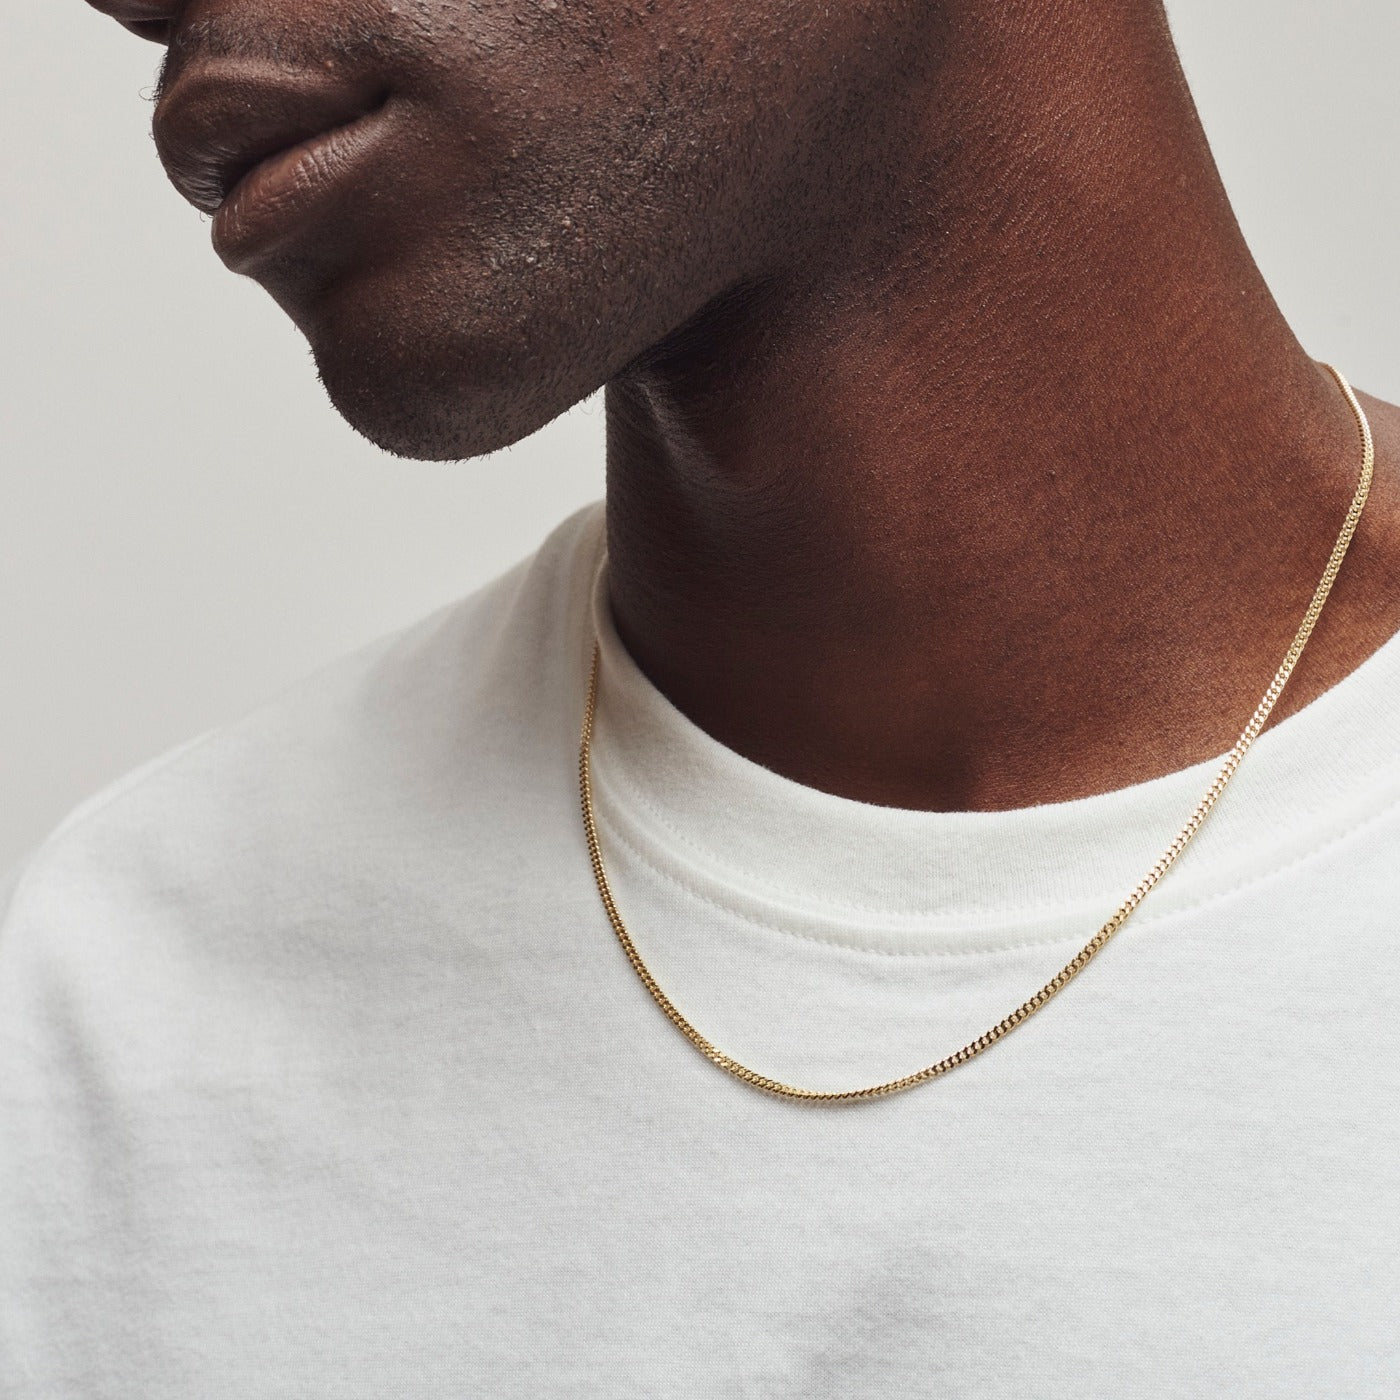 Essential” Gold Chains